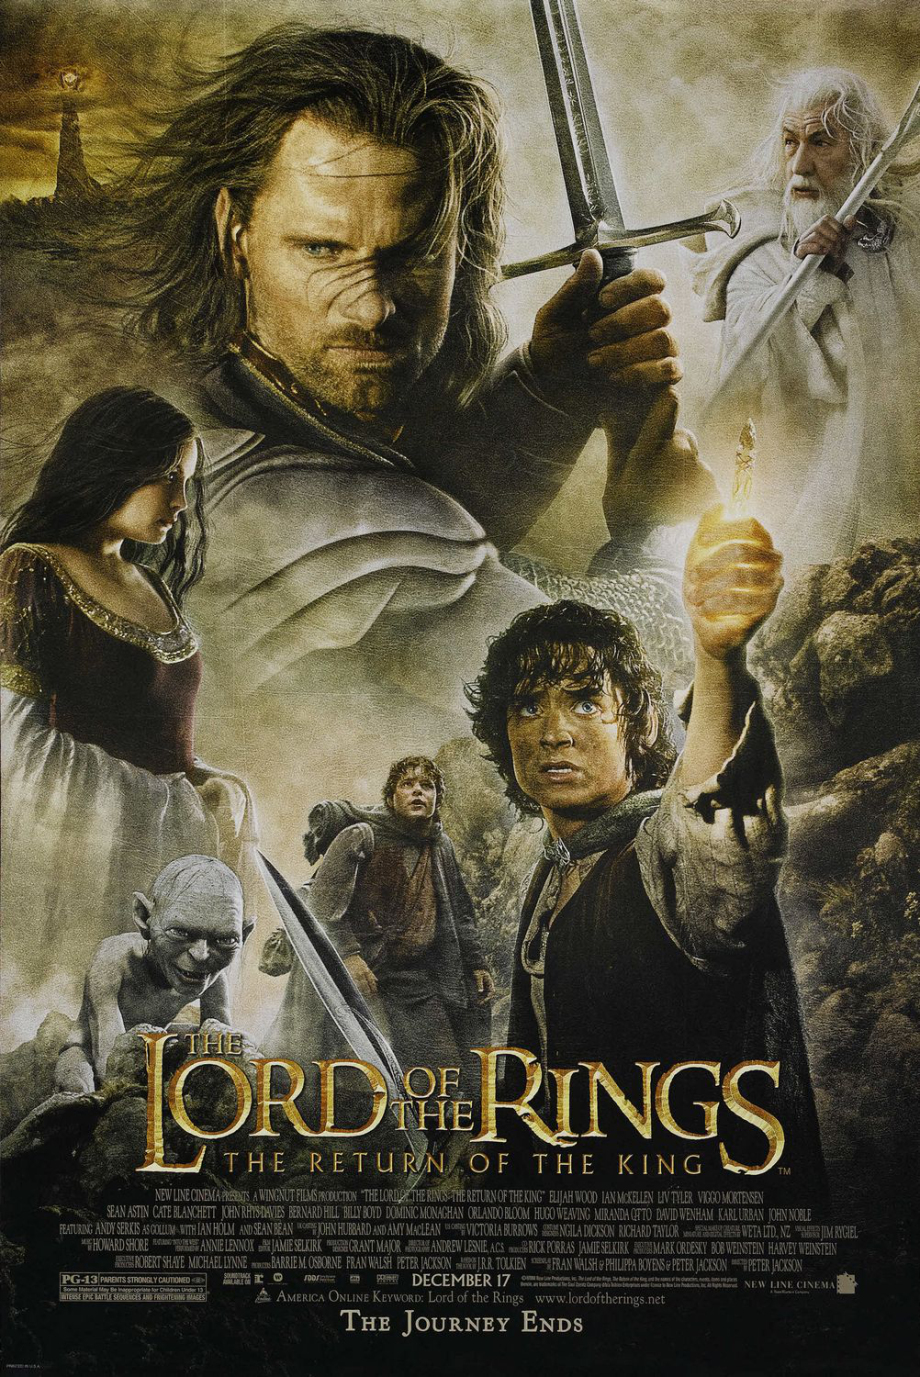 2001: The Lord of the Rings: The Fellowship of the Ring — 8.8